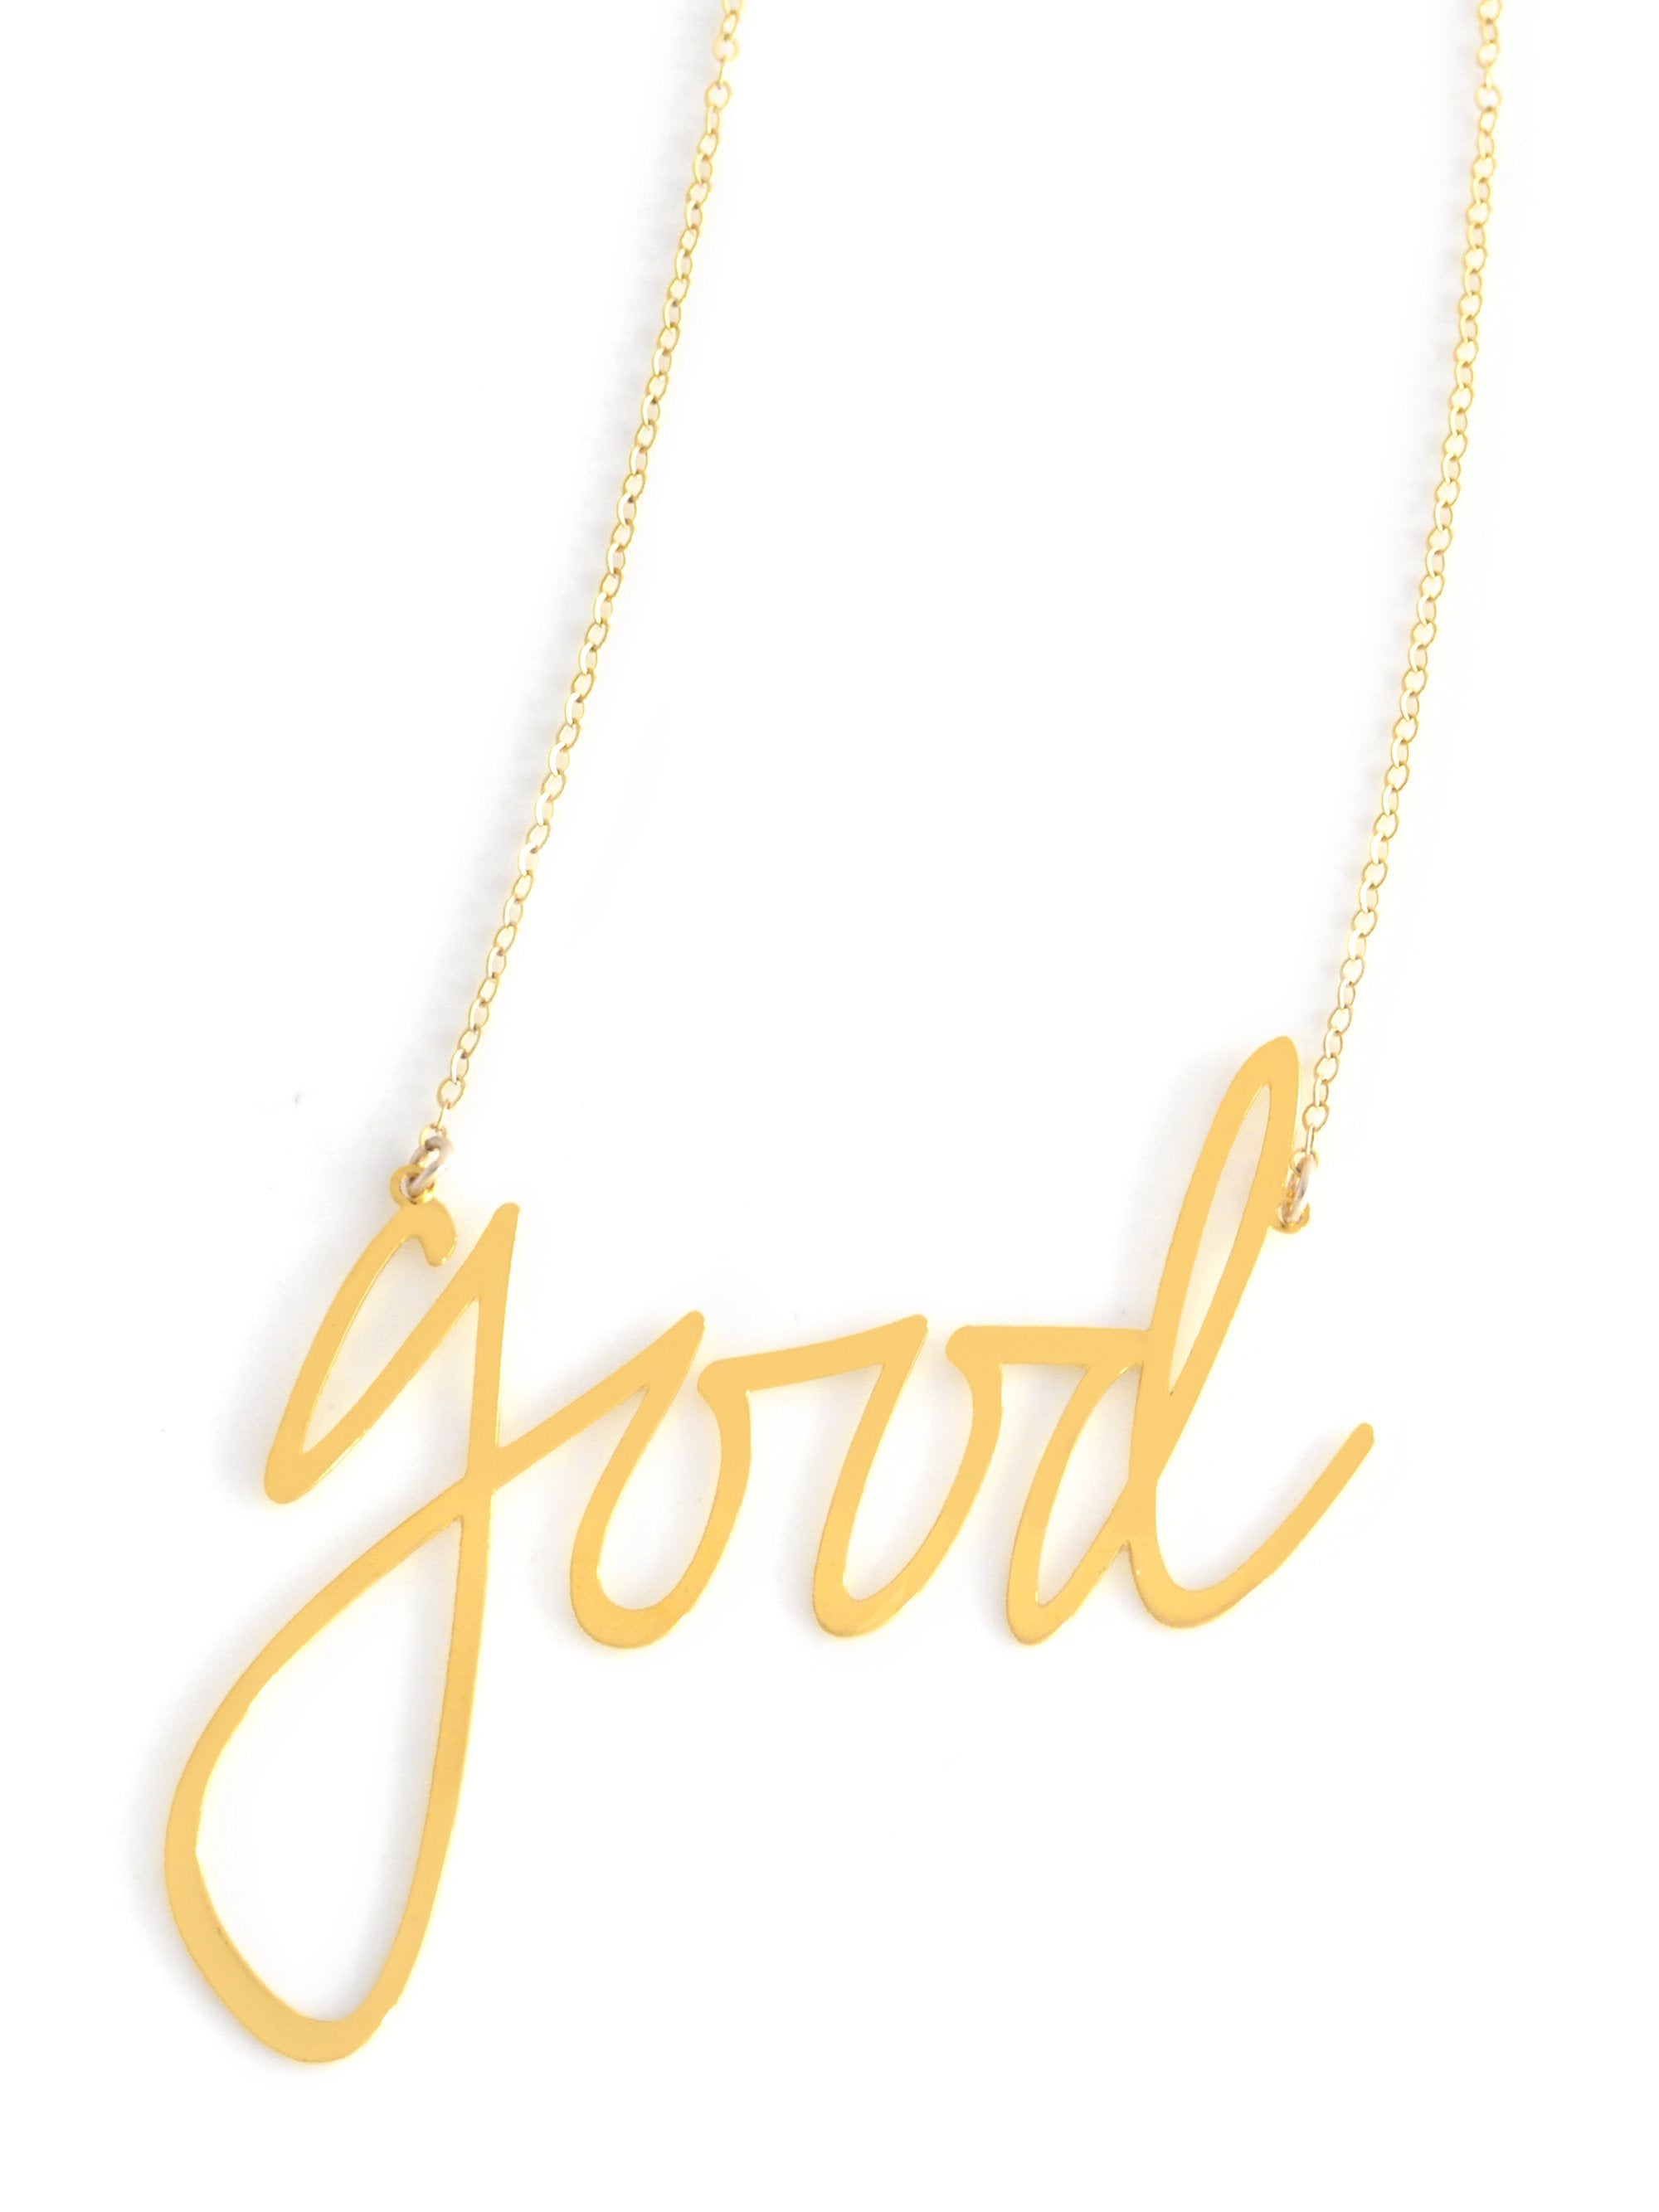 Good Necklace - High Quality, Affordable, Hand Written, Self Love, Mantra Word Necklace - Available in Gold and Silver - Small and Large Sizes - Made in USA - Brevity Jewelry